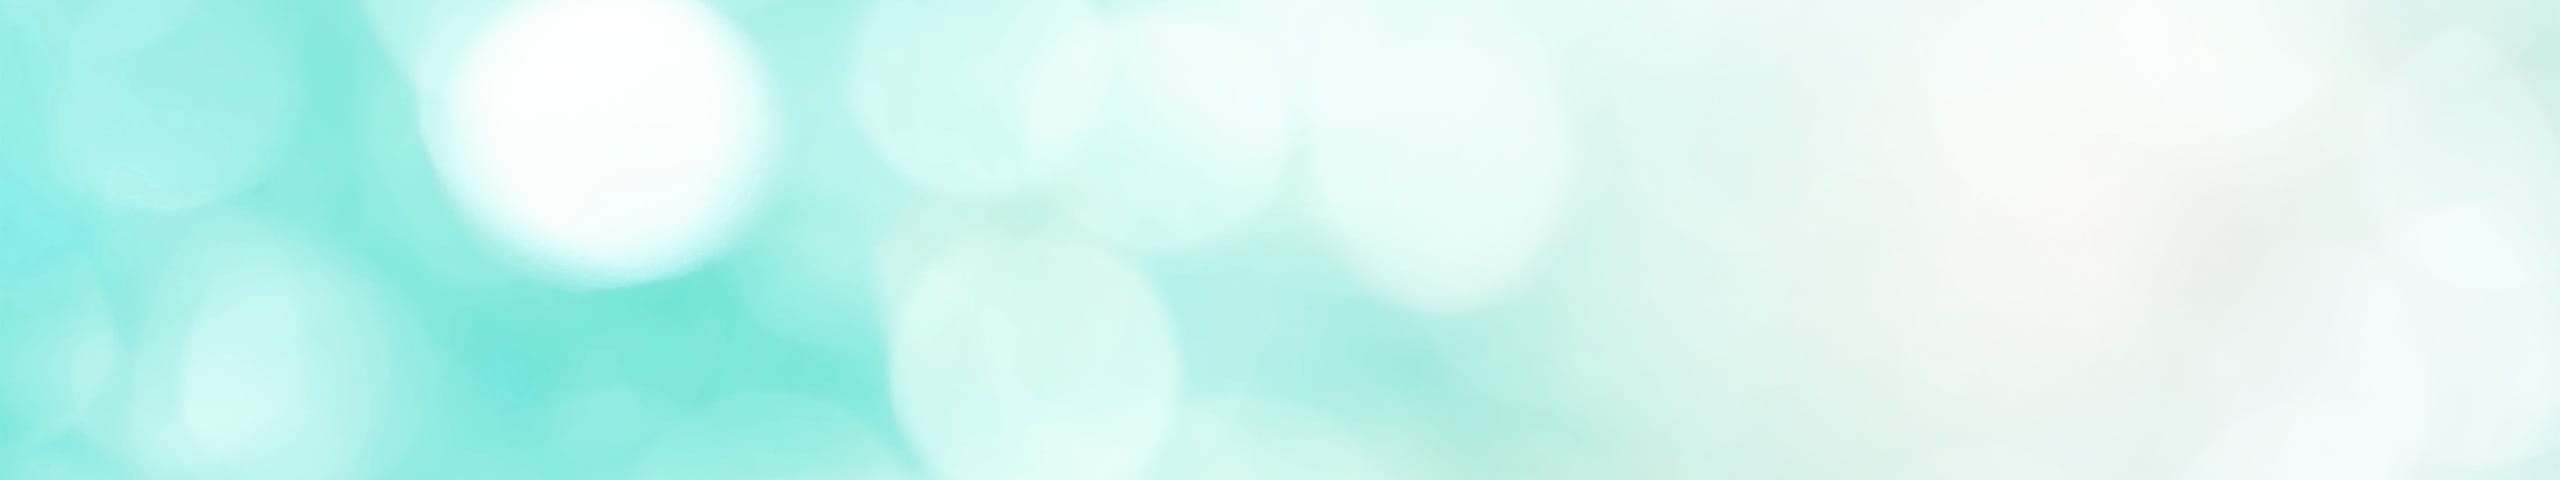 An abstract shallow depth of field photograph over teal